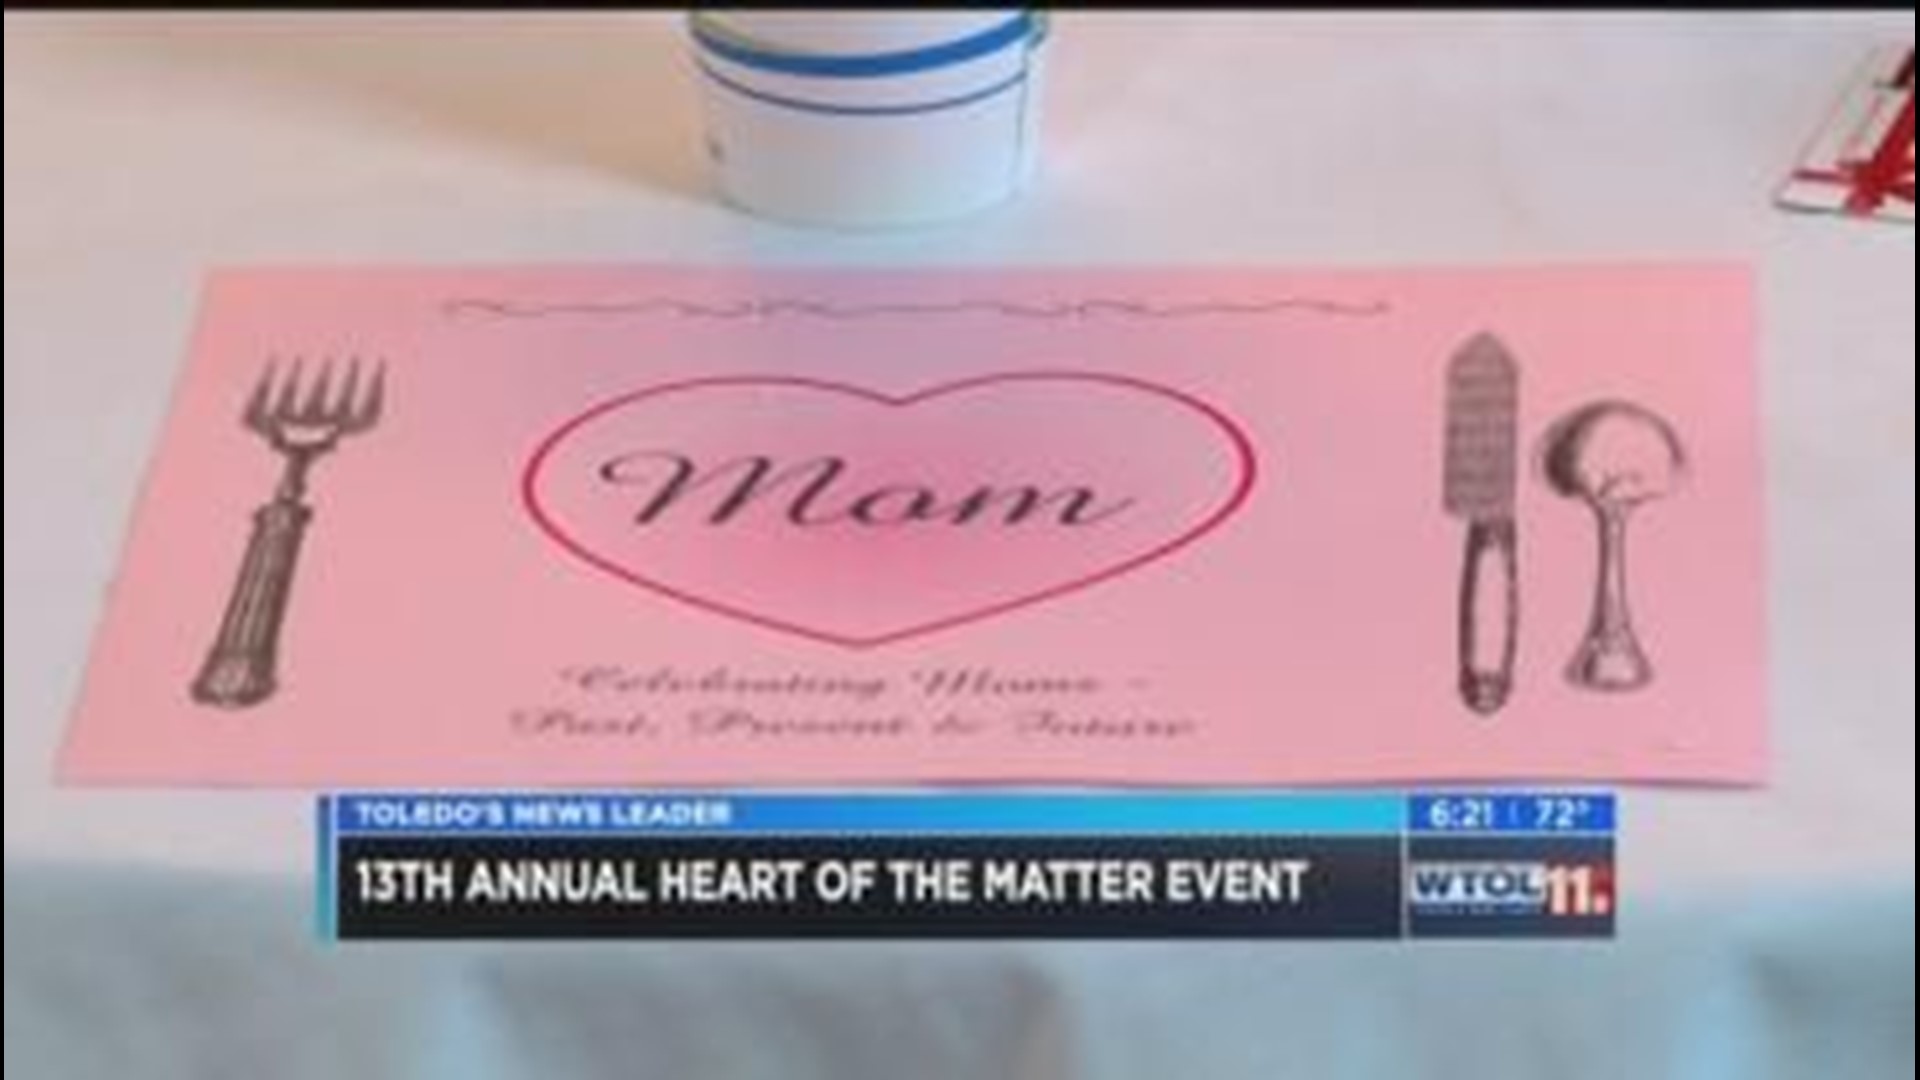 13th annual Heart of the Matter event